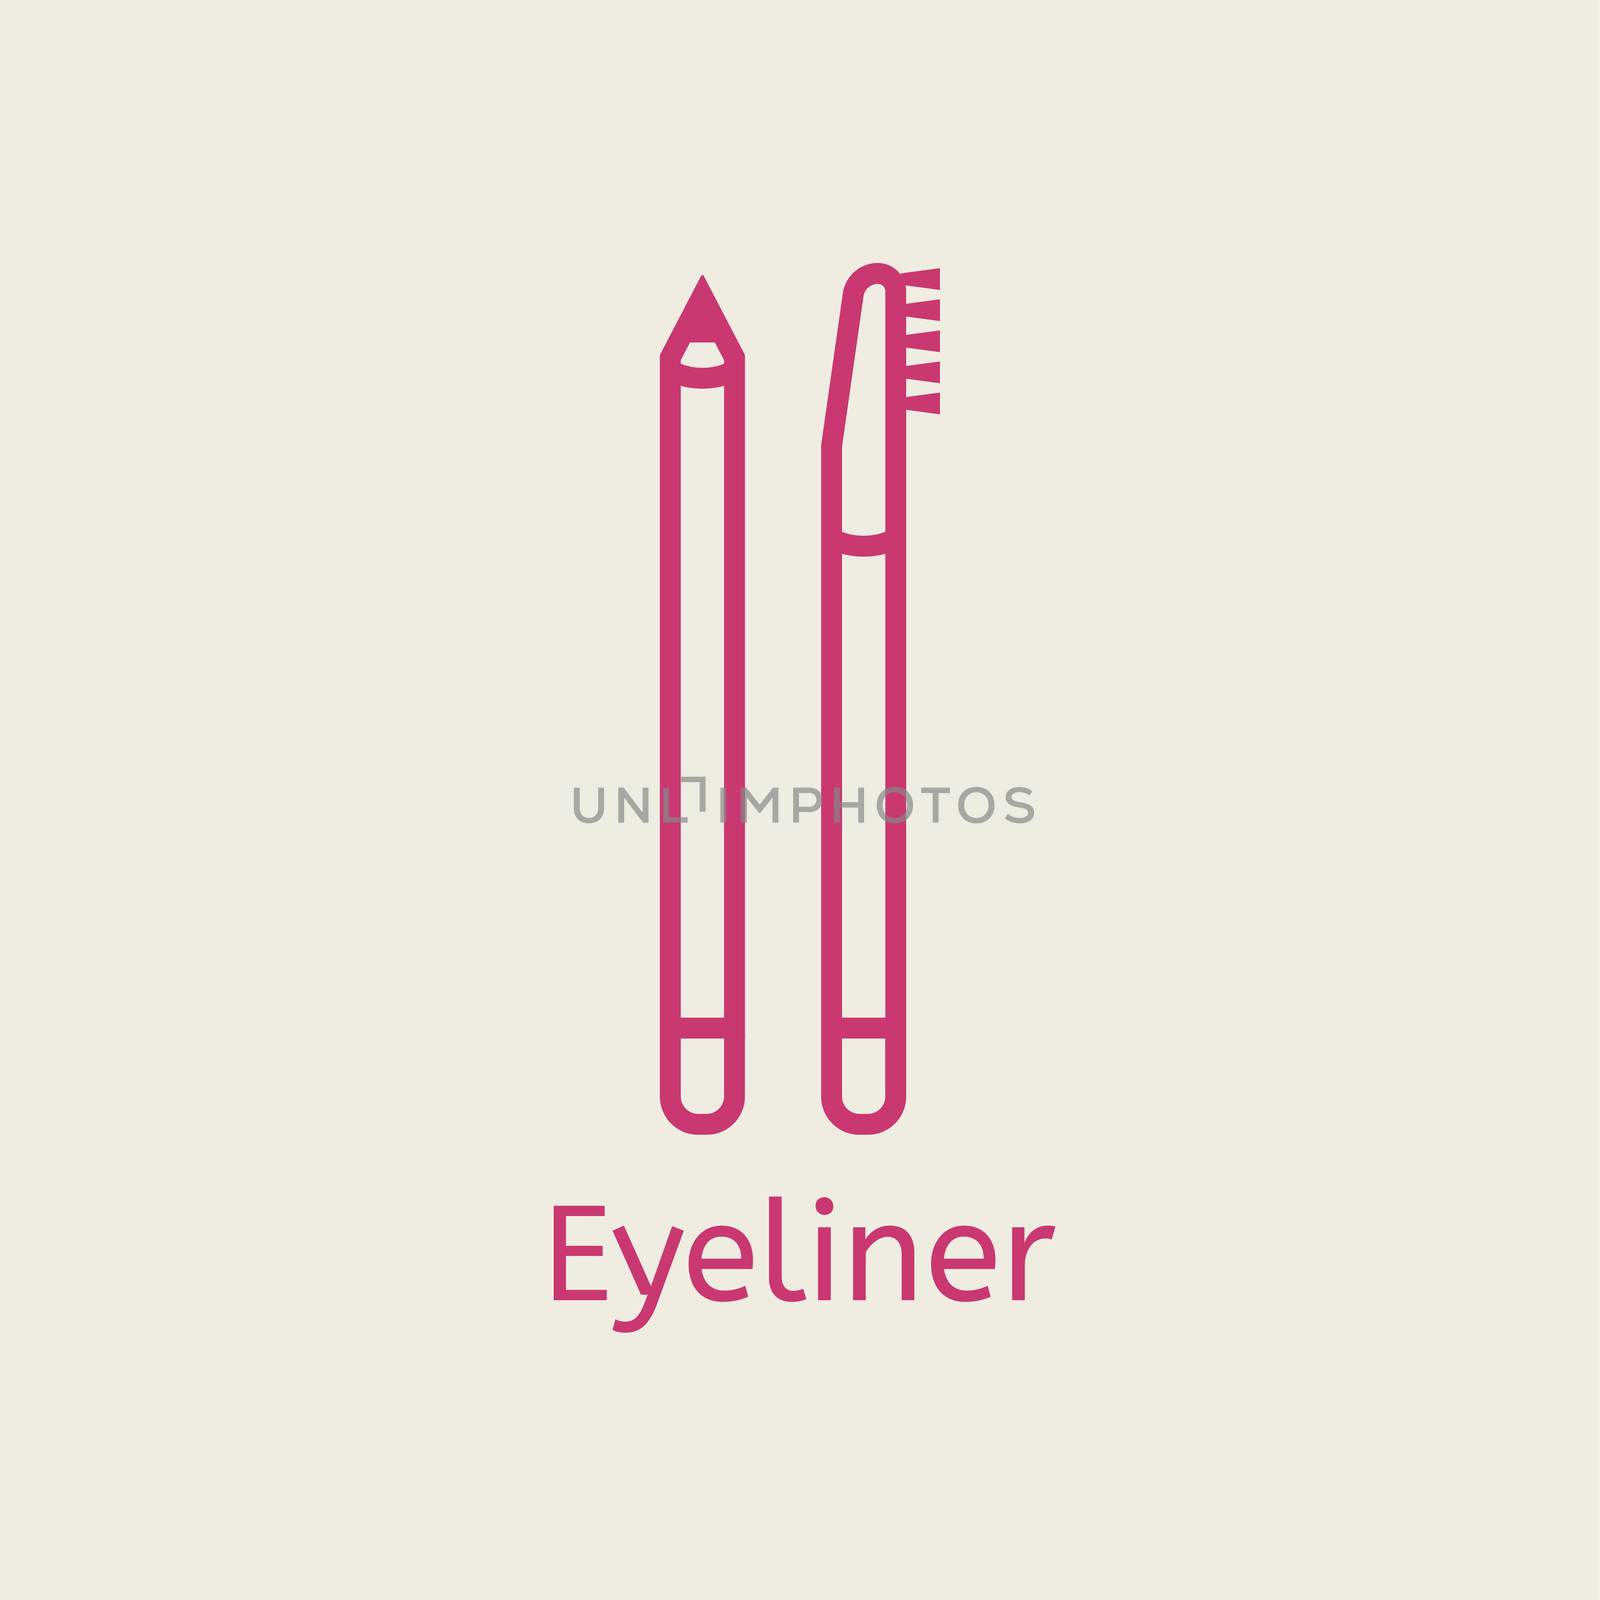  cosmetic eyeliner pensil line icon. Eye liner thin linear signs for makeup and visage. Cosmetic for underlining the eyes.